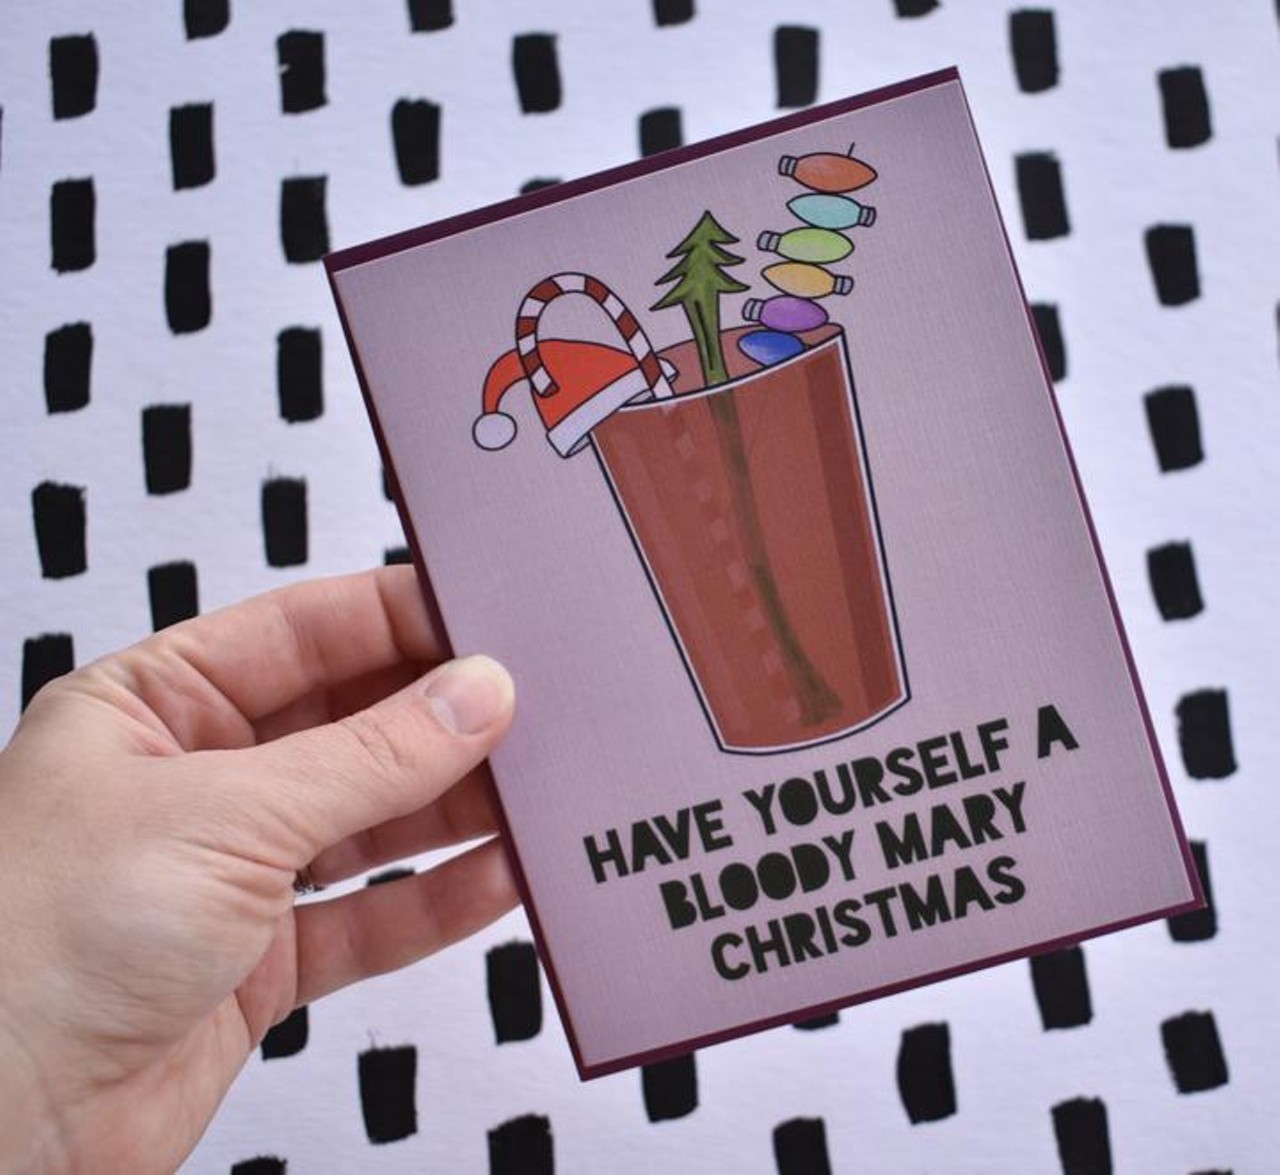 Fiber and Gloss Holiday Cards 
Cost: $4 each
Sometimes all you need is a holiday card to brighten the spirit, and Fiber and Gloss has plenty of sassy and funny cards  that will spread the holiday cheer. Plus, you can feel good that these cards are hand drawn and printed in Ohio.